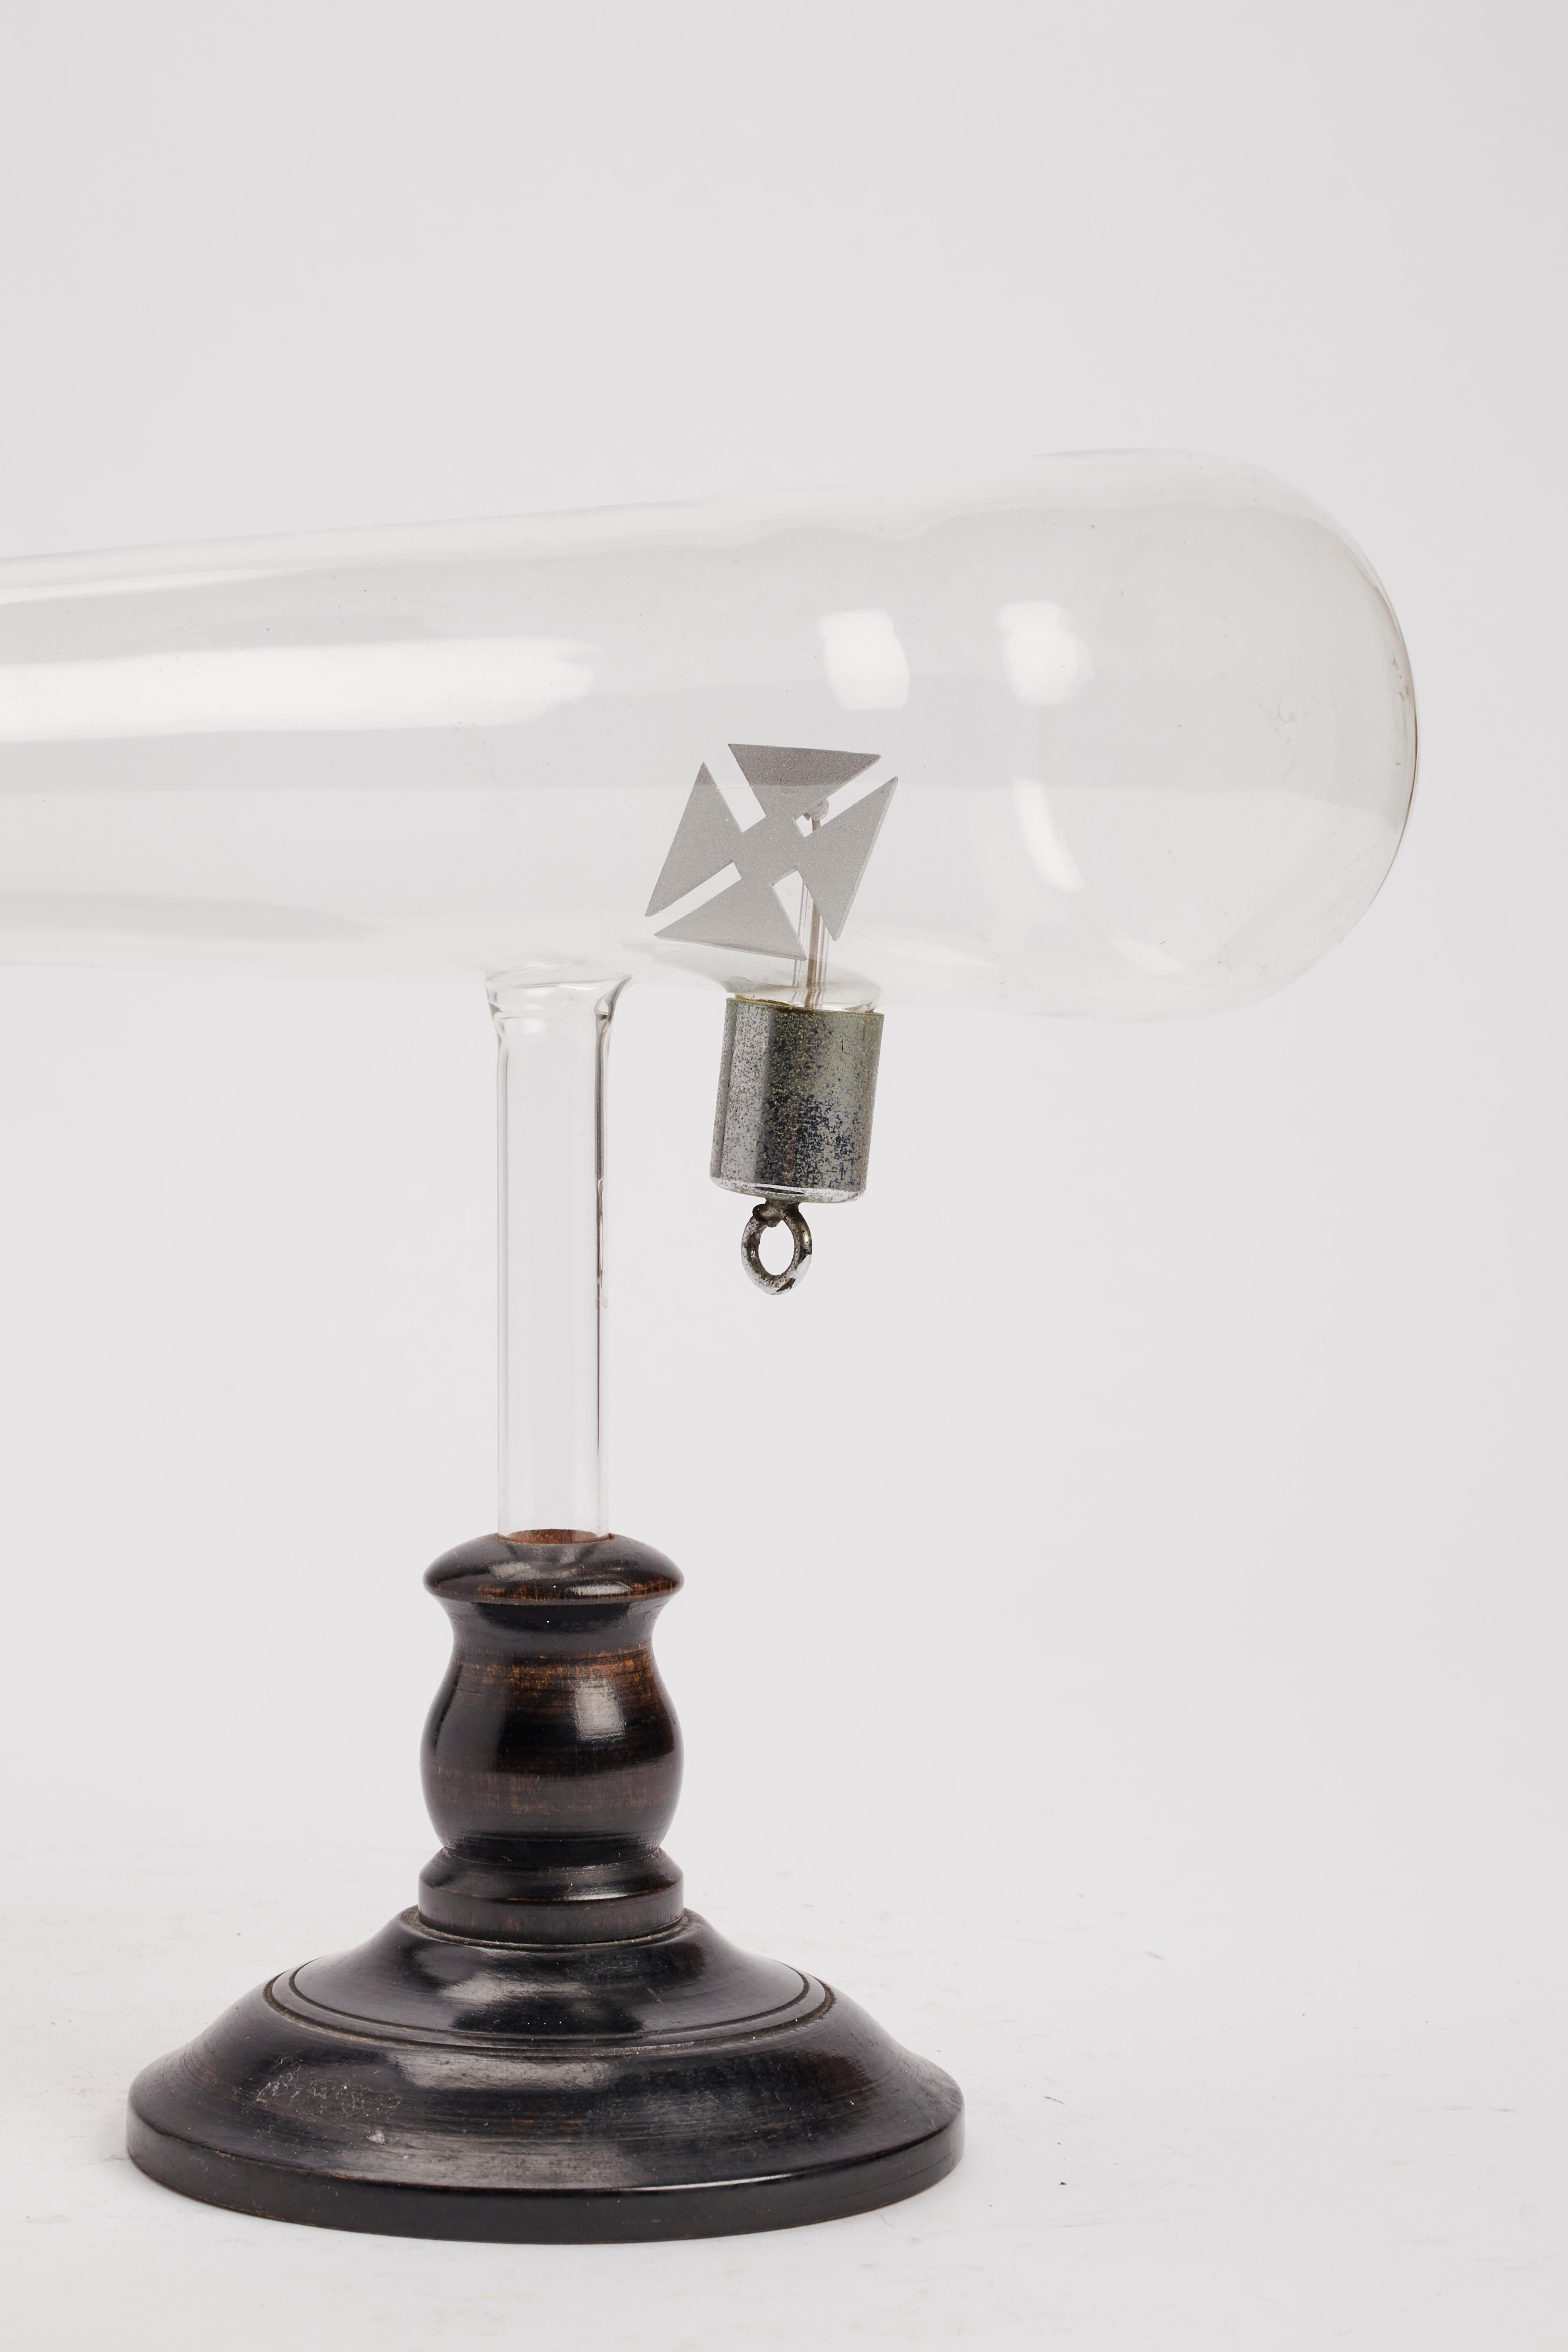 Blown glass scientific instrument. A fine example of Crookes tube with Maltese cross, the precursor of the cathode tube. It demonstrates the rectilinear motion of the rays so that the interposed elements generate shadows. Painted wood base, black